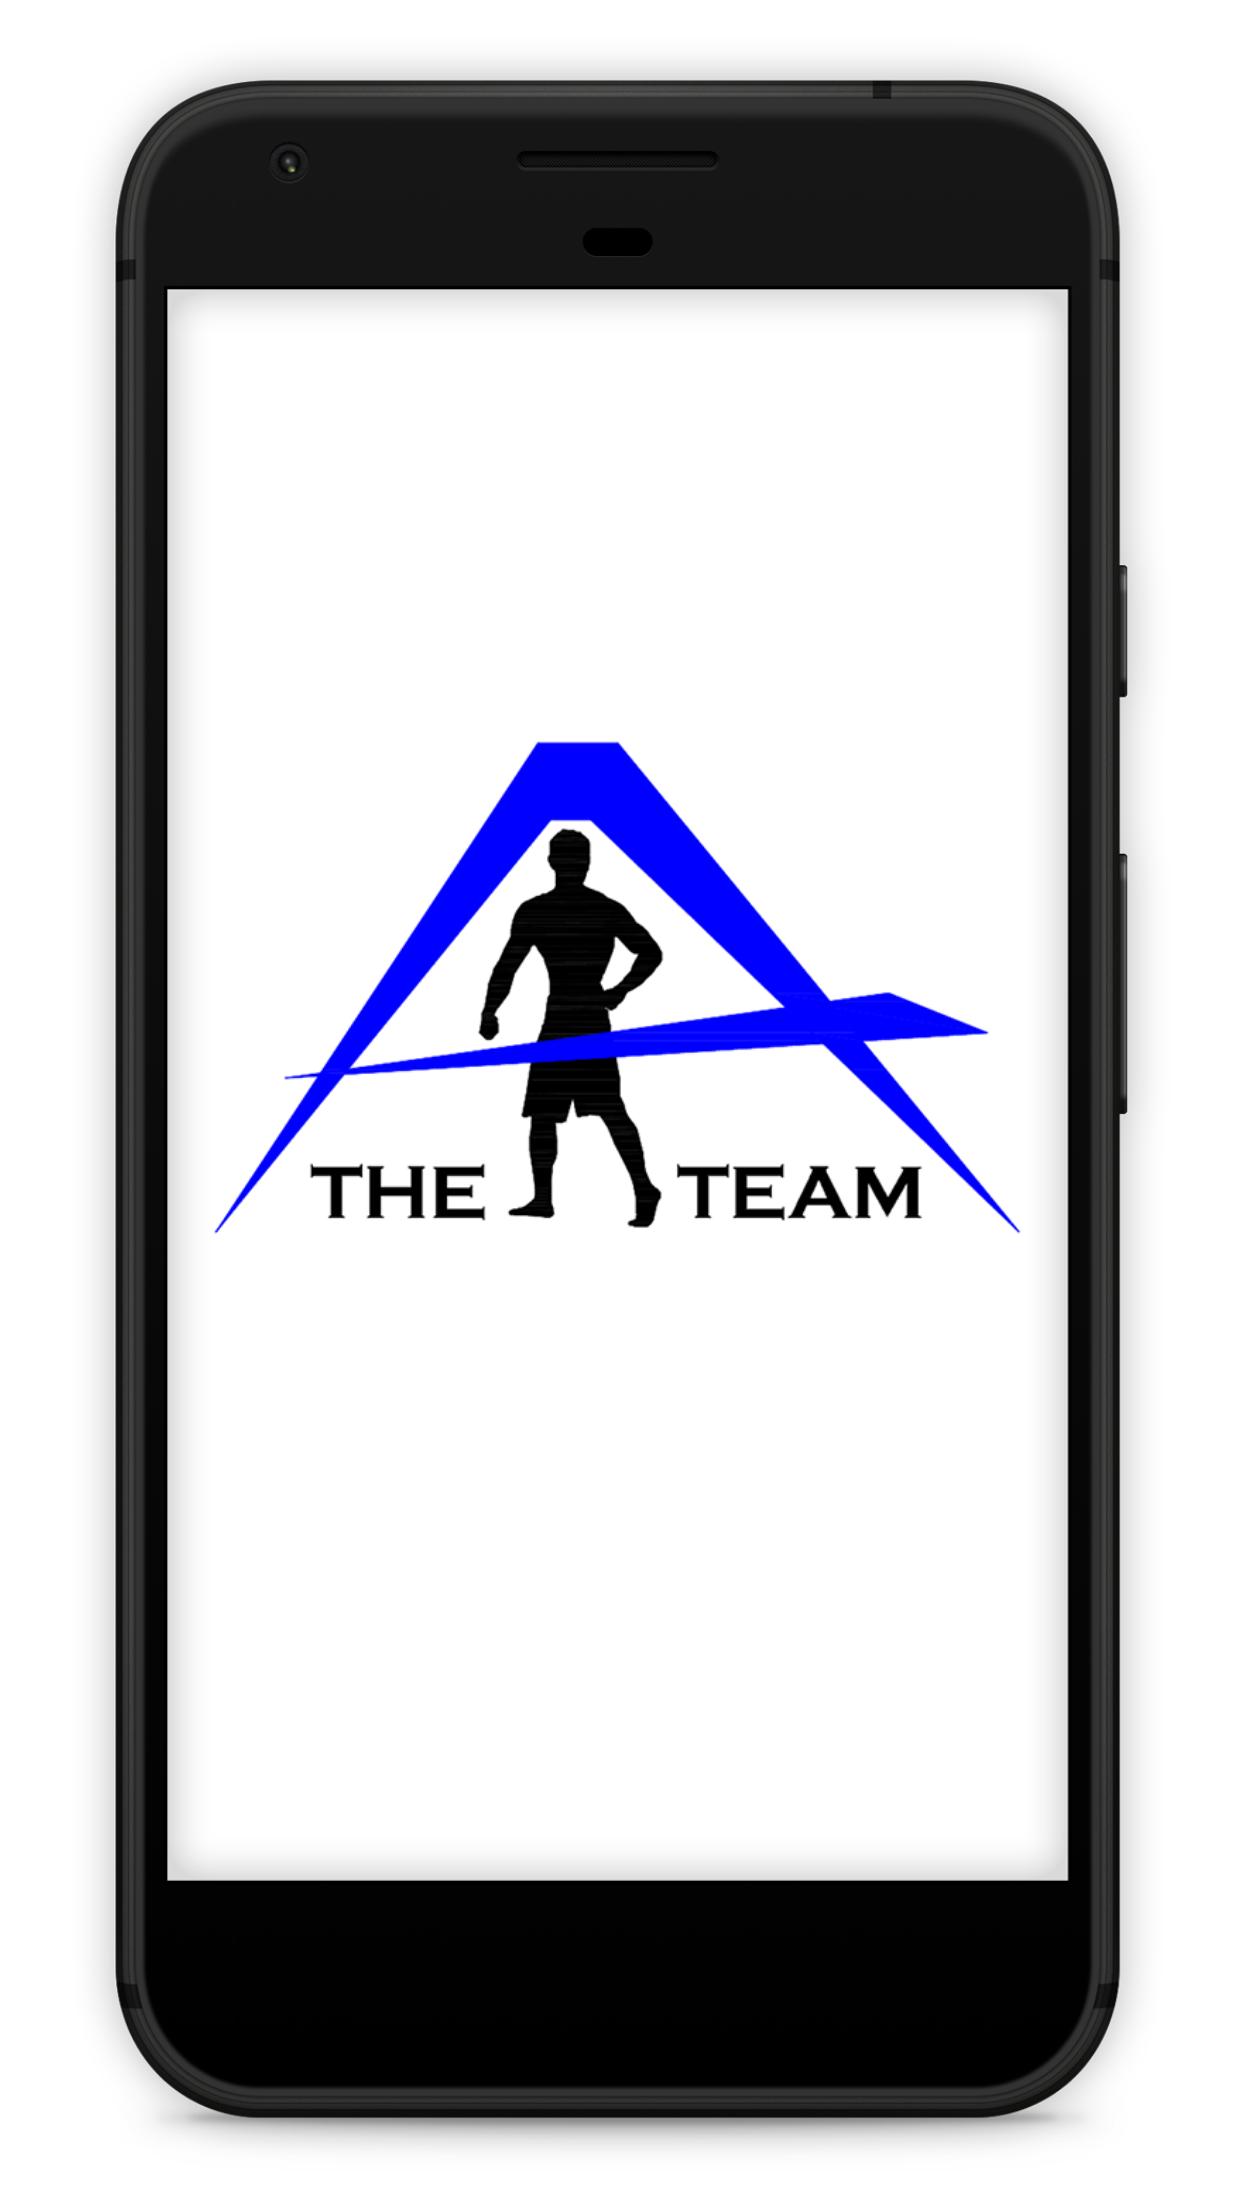 A TEAM for Android - APK Download